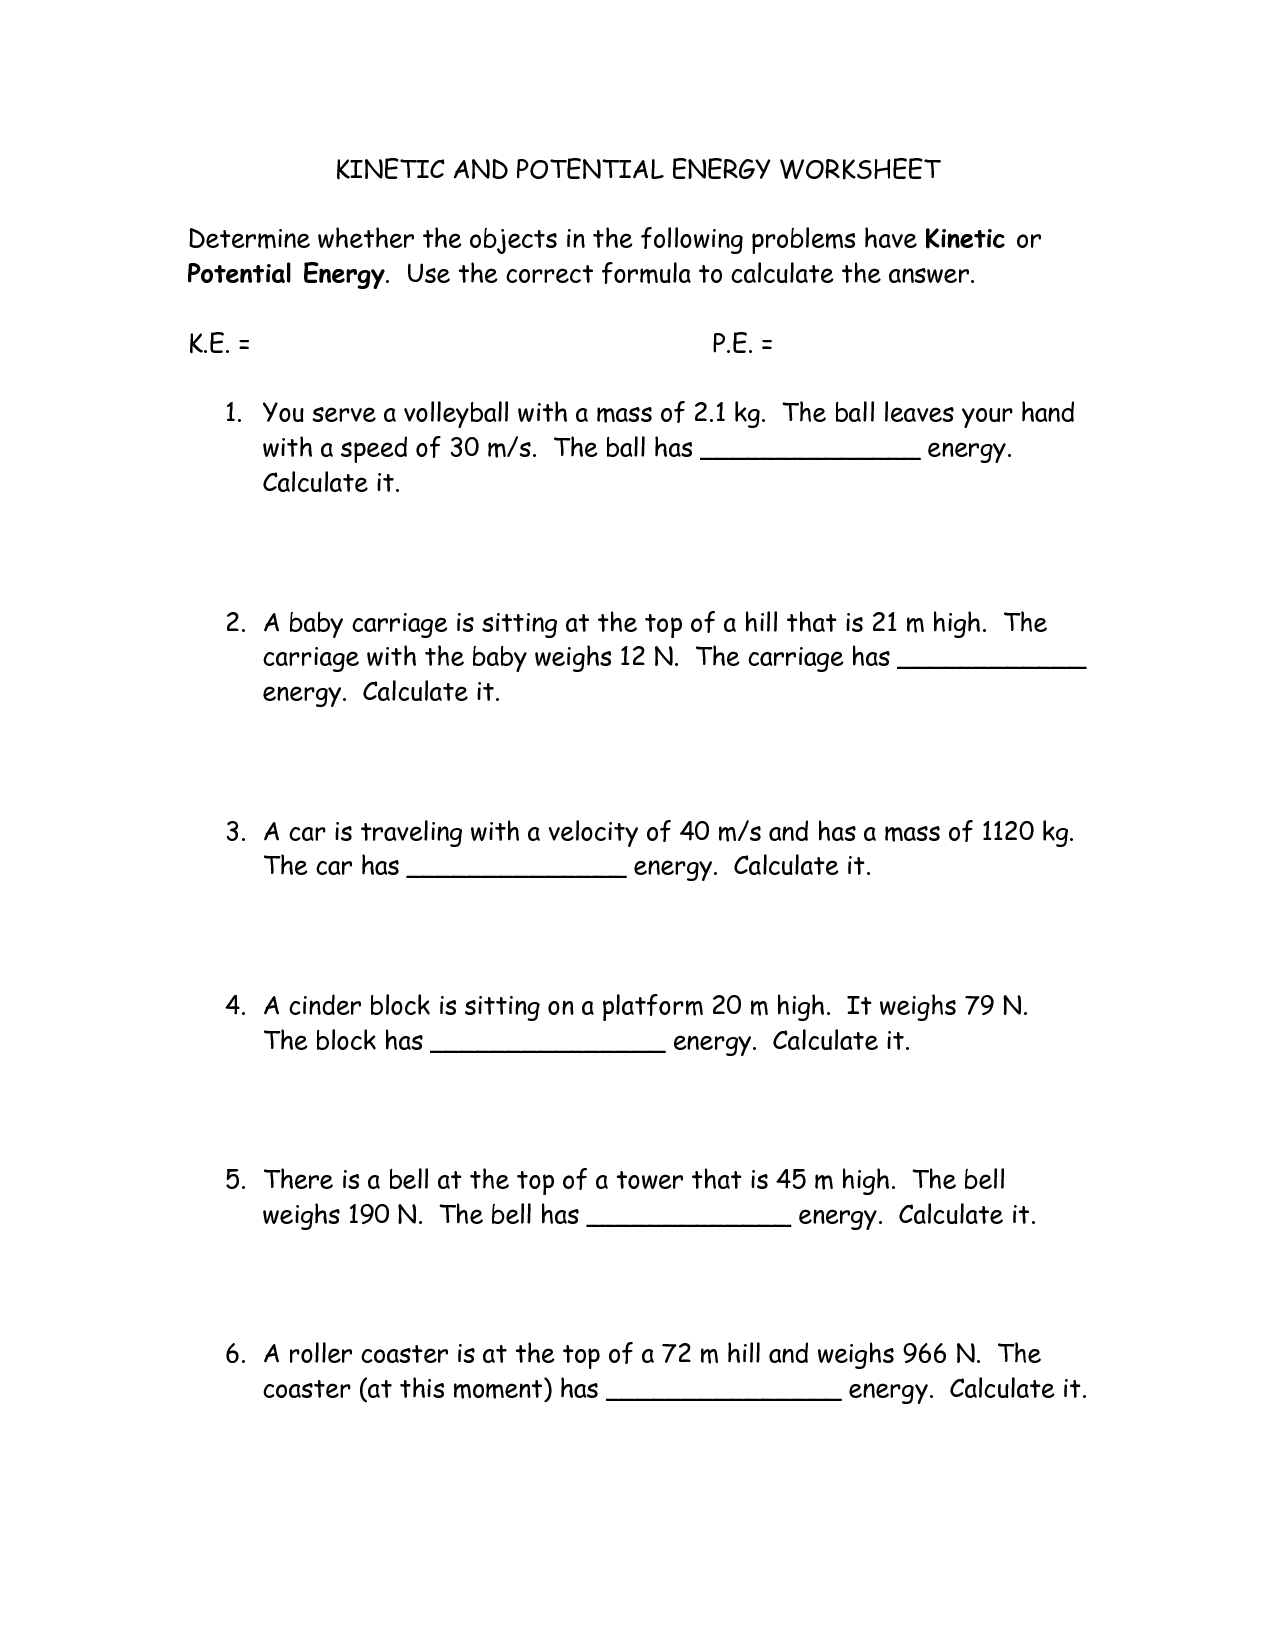 Potential and Kinetic Energy Worksheet with Answers Image